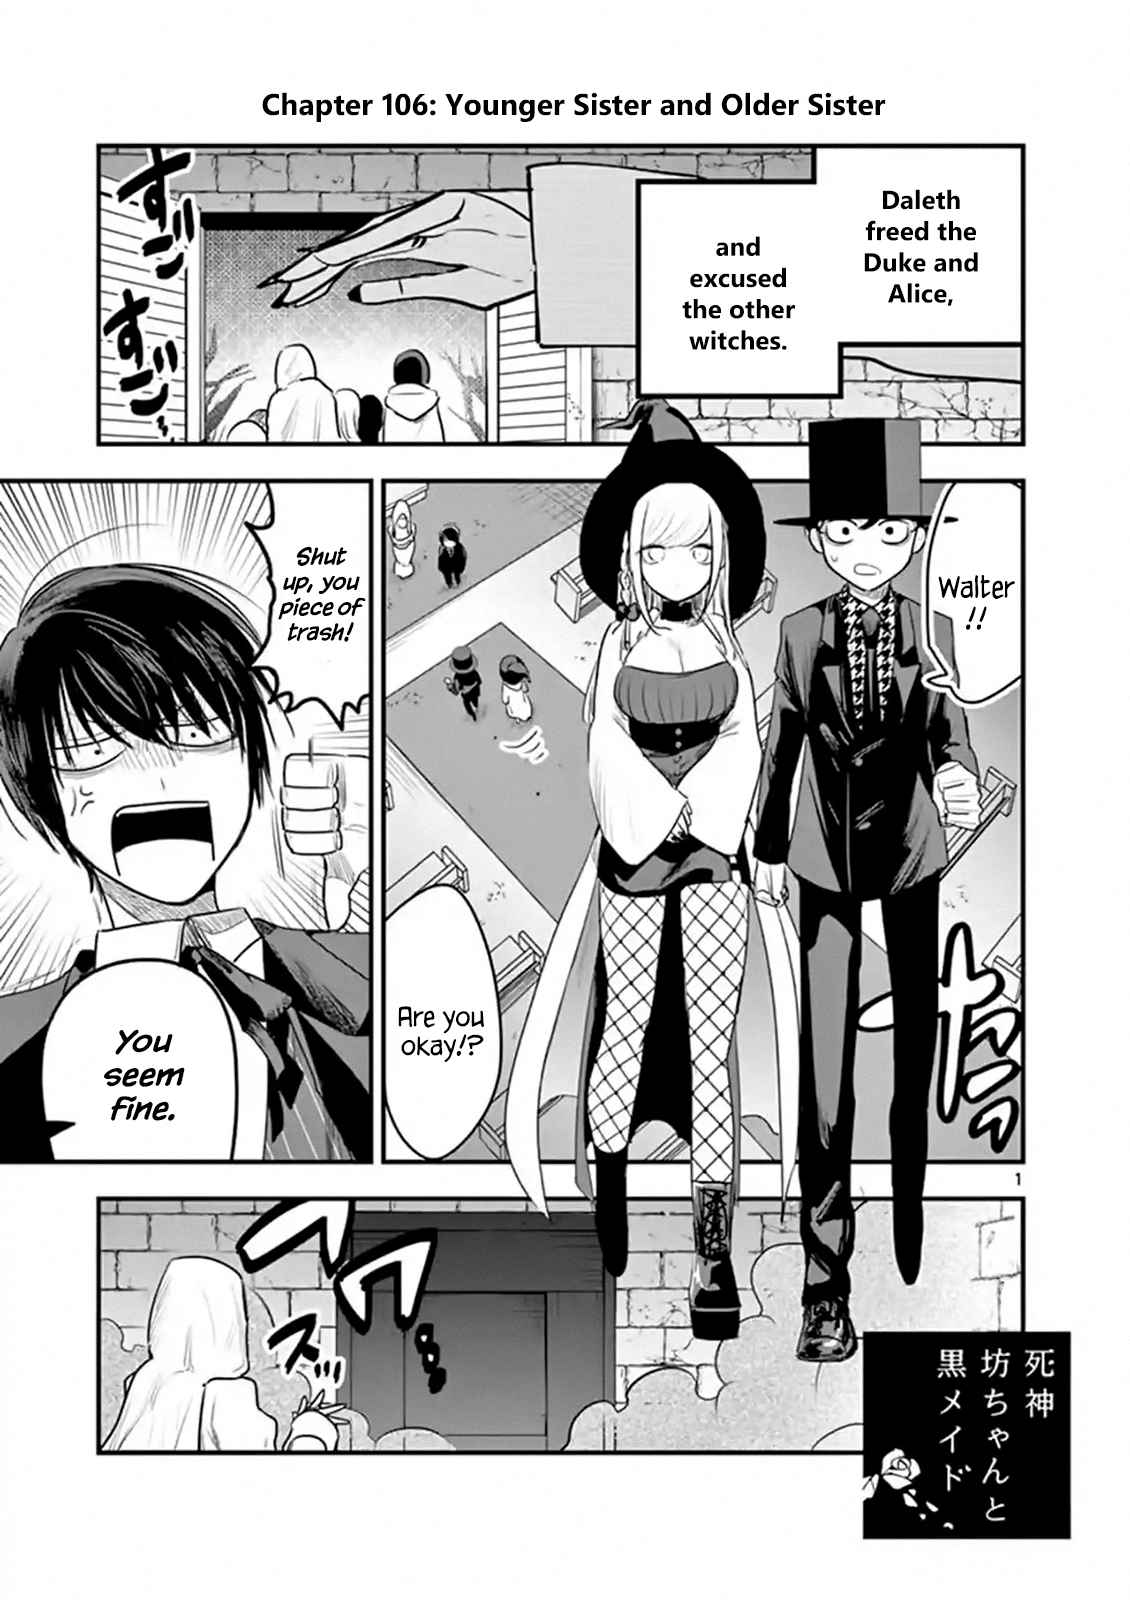 The Duke of Death and His Black Maid Vol. 7 Ch. 106 Younger Sister and Older Sister